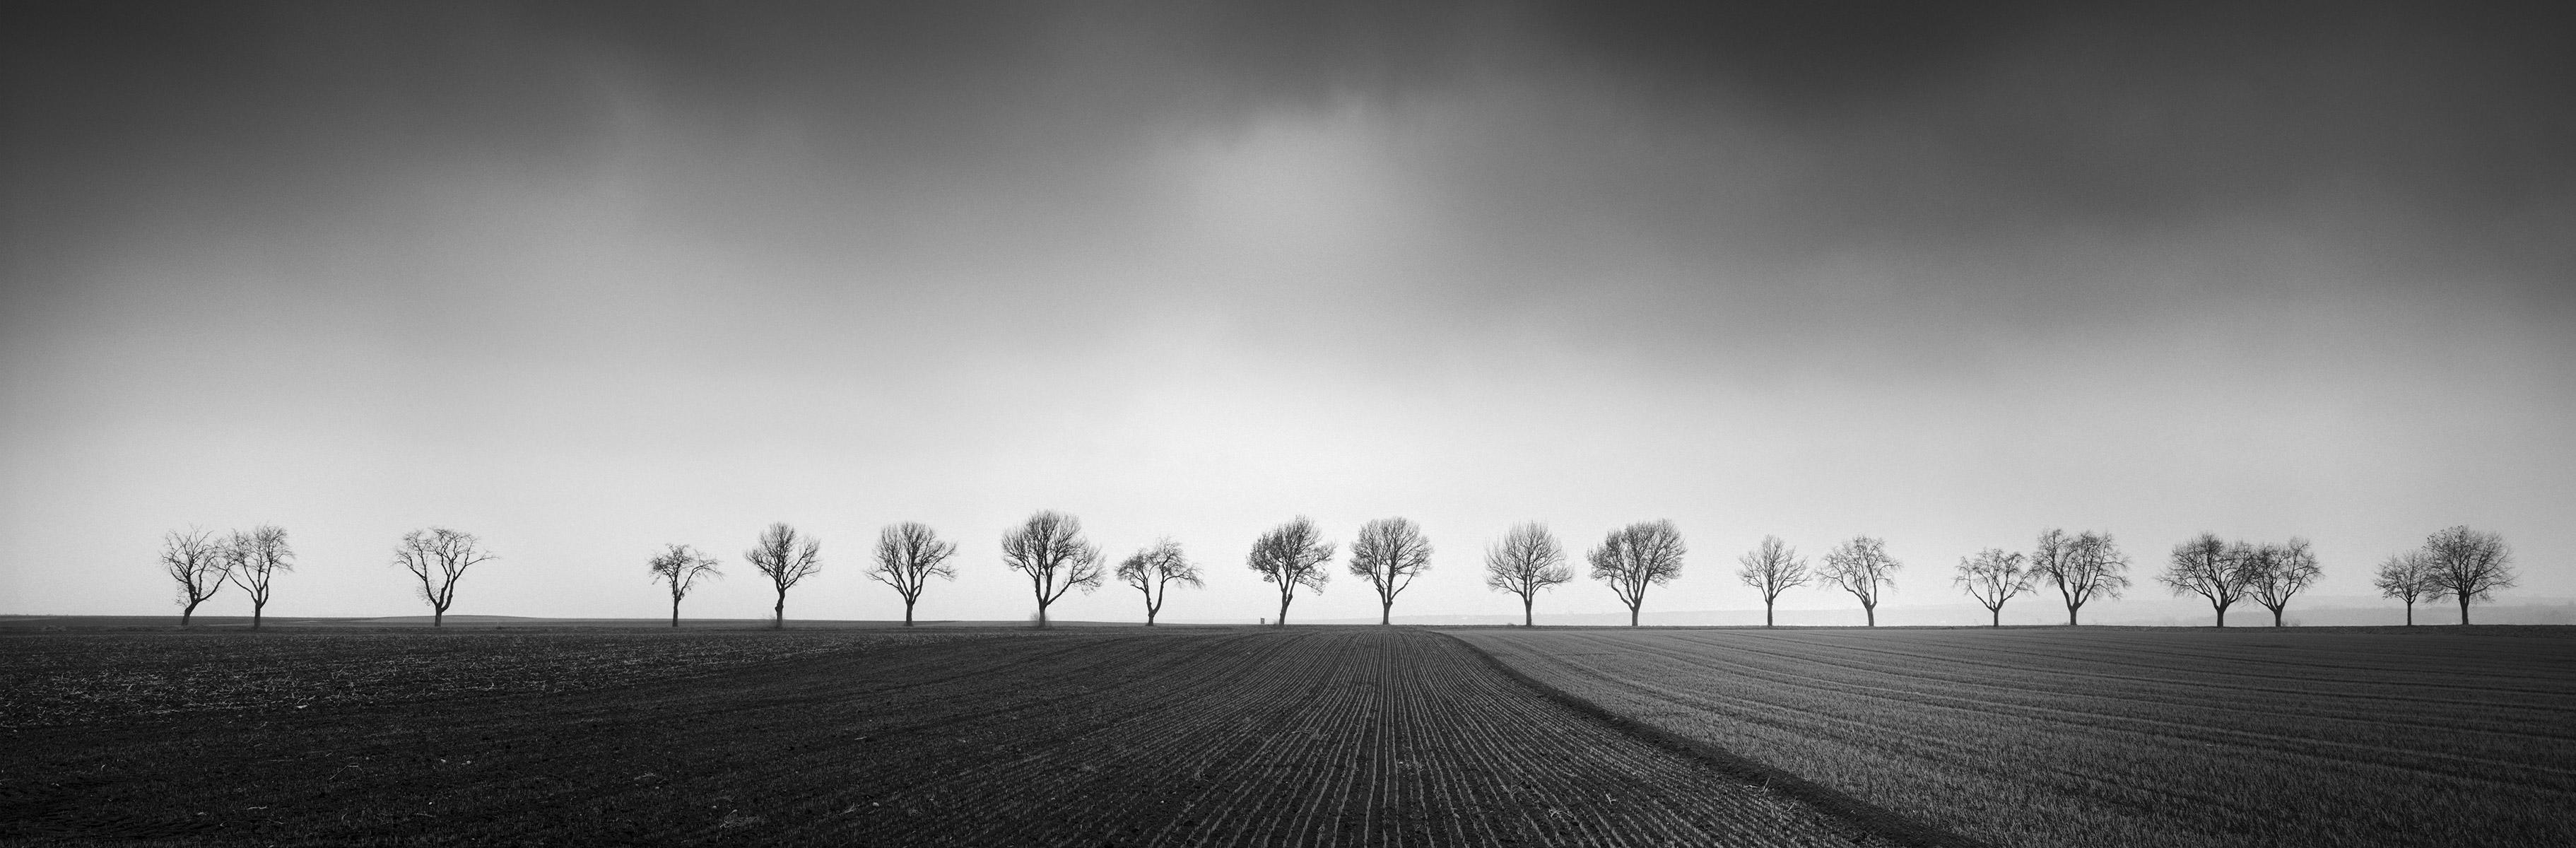 Twenty Trees, Avenue, Row of Trees, black and white photography, landscapes 